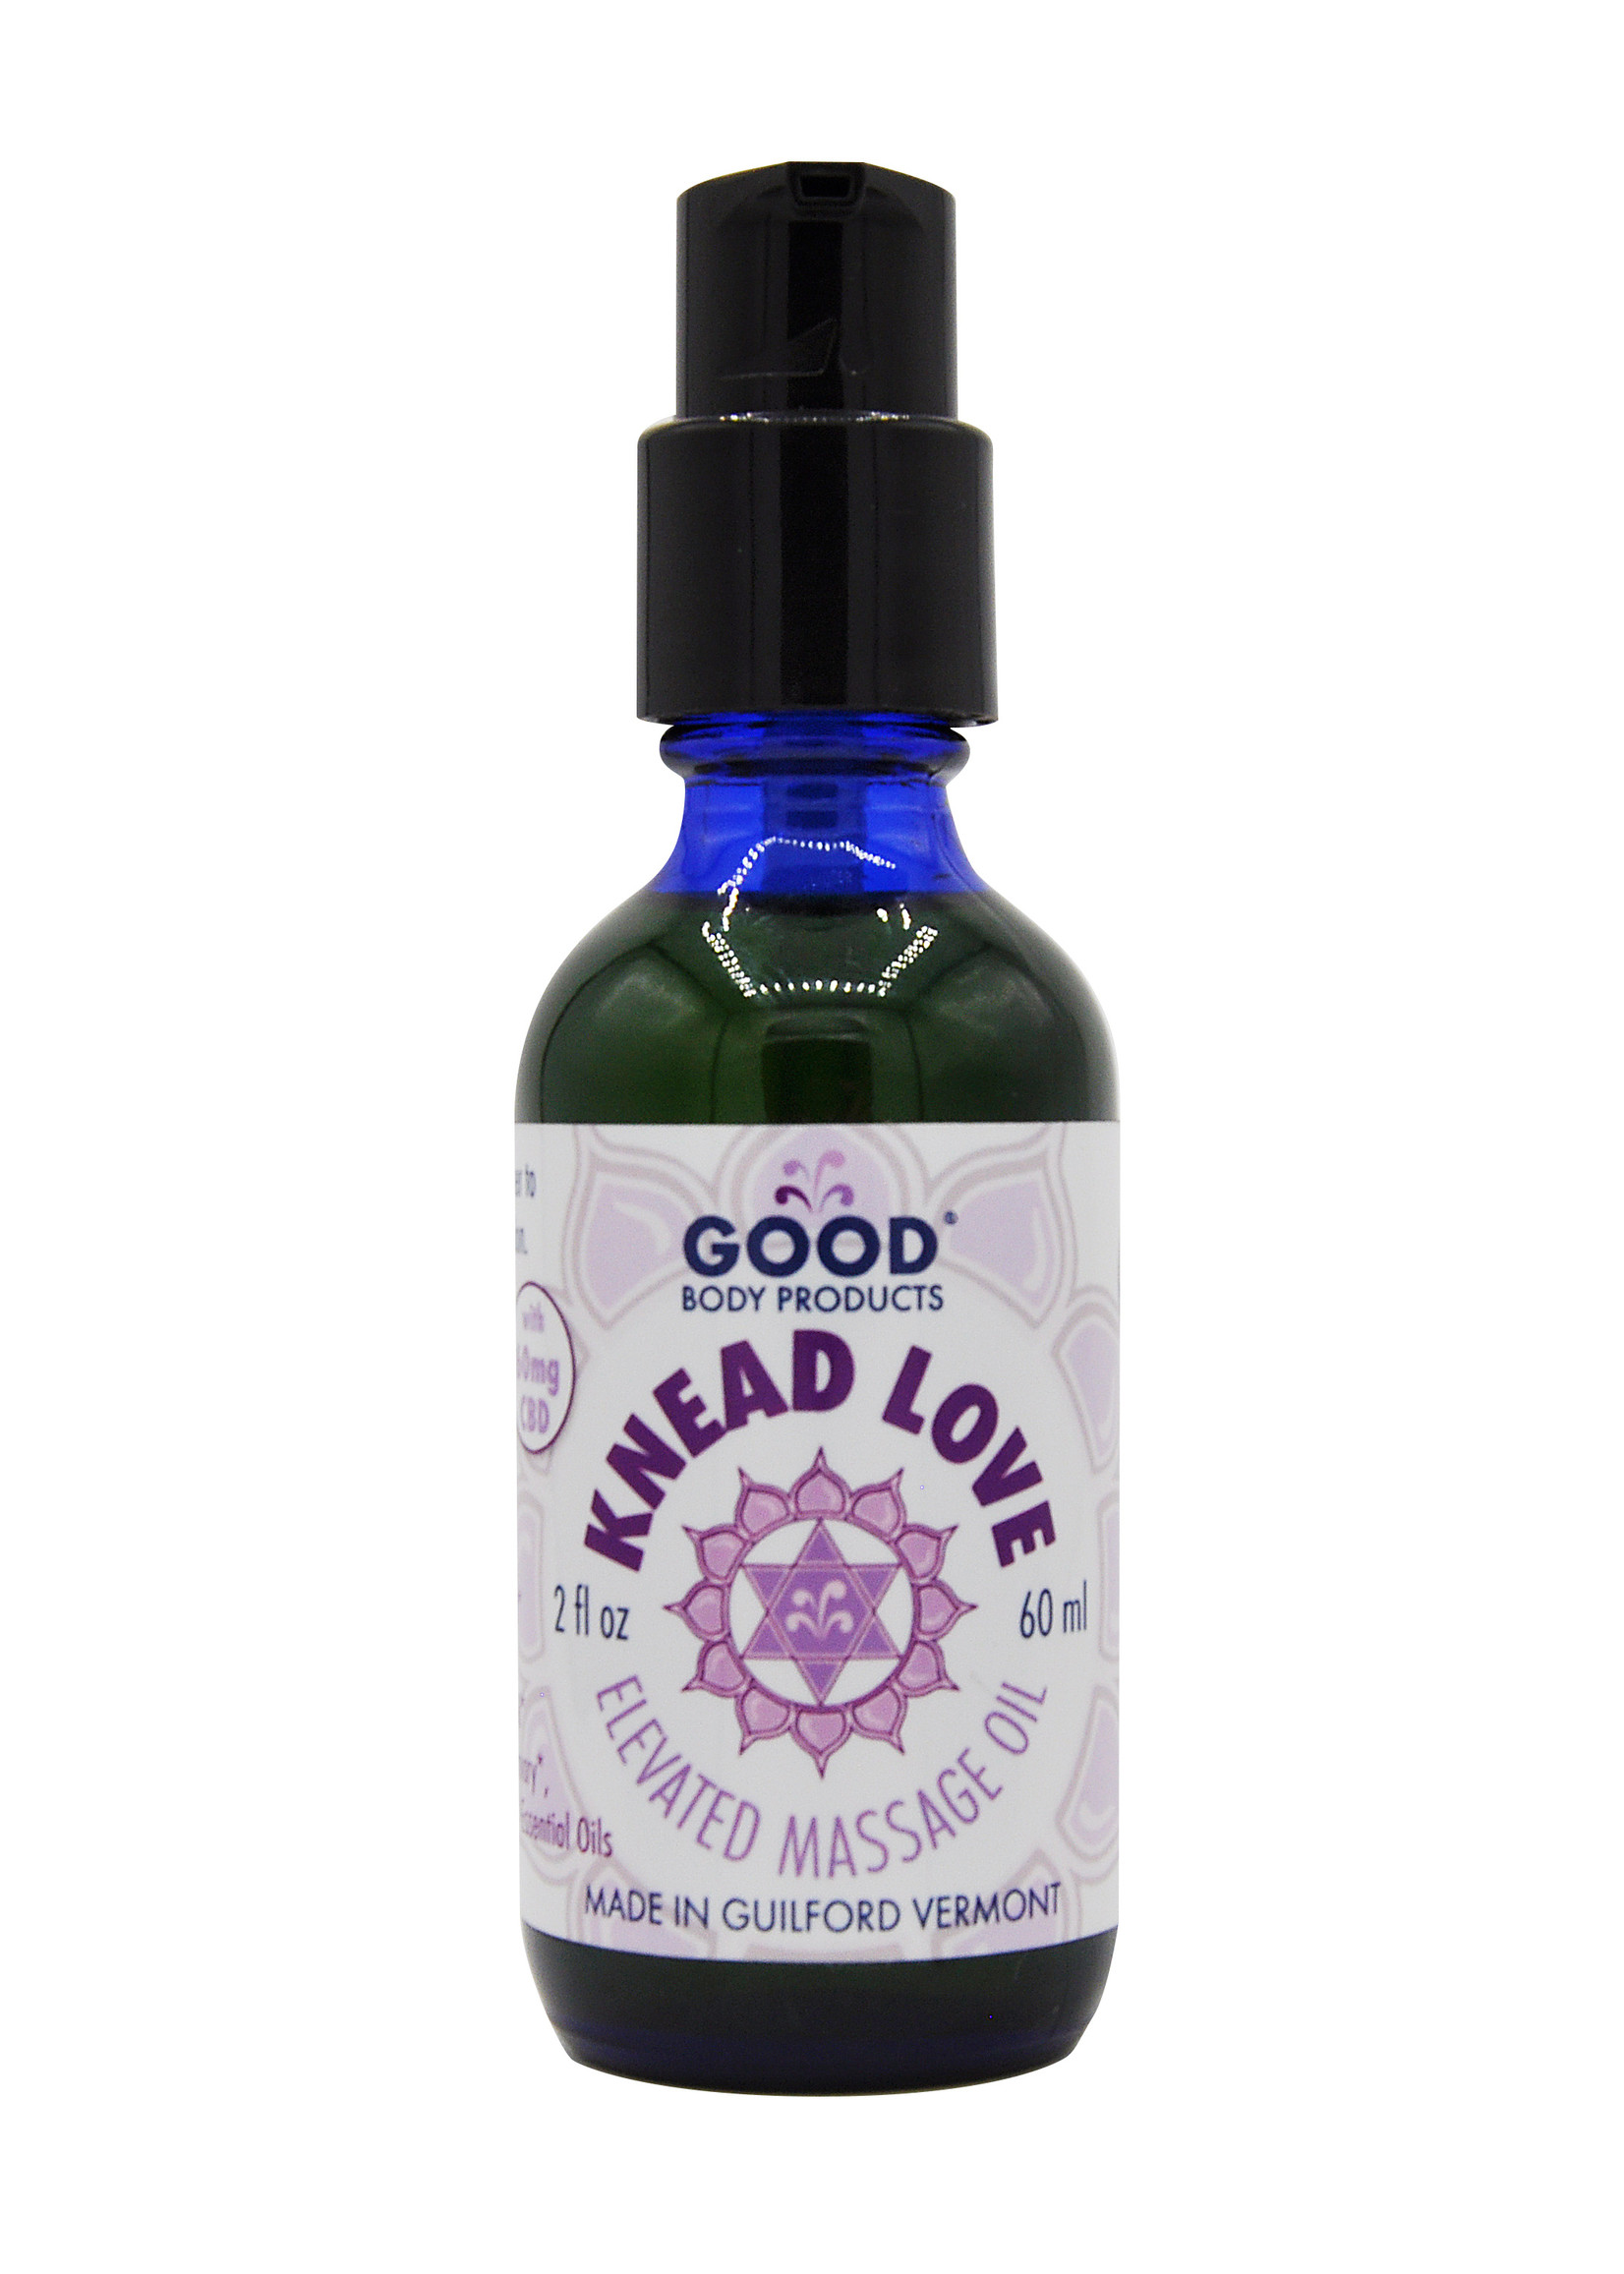 Good Body Products GBP, Knead Love Massage Oil with Arnica and CBD, 4oz